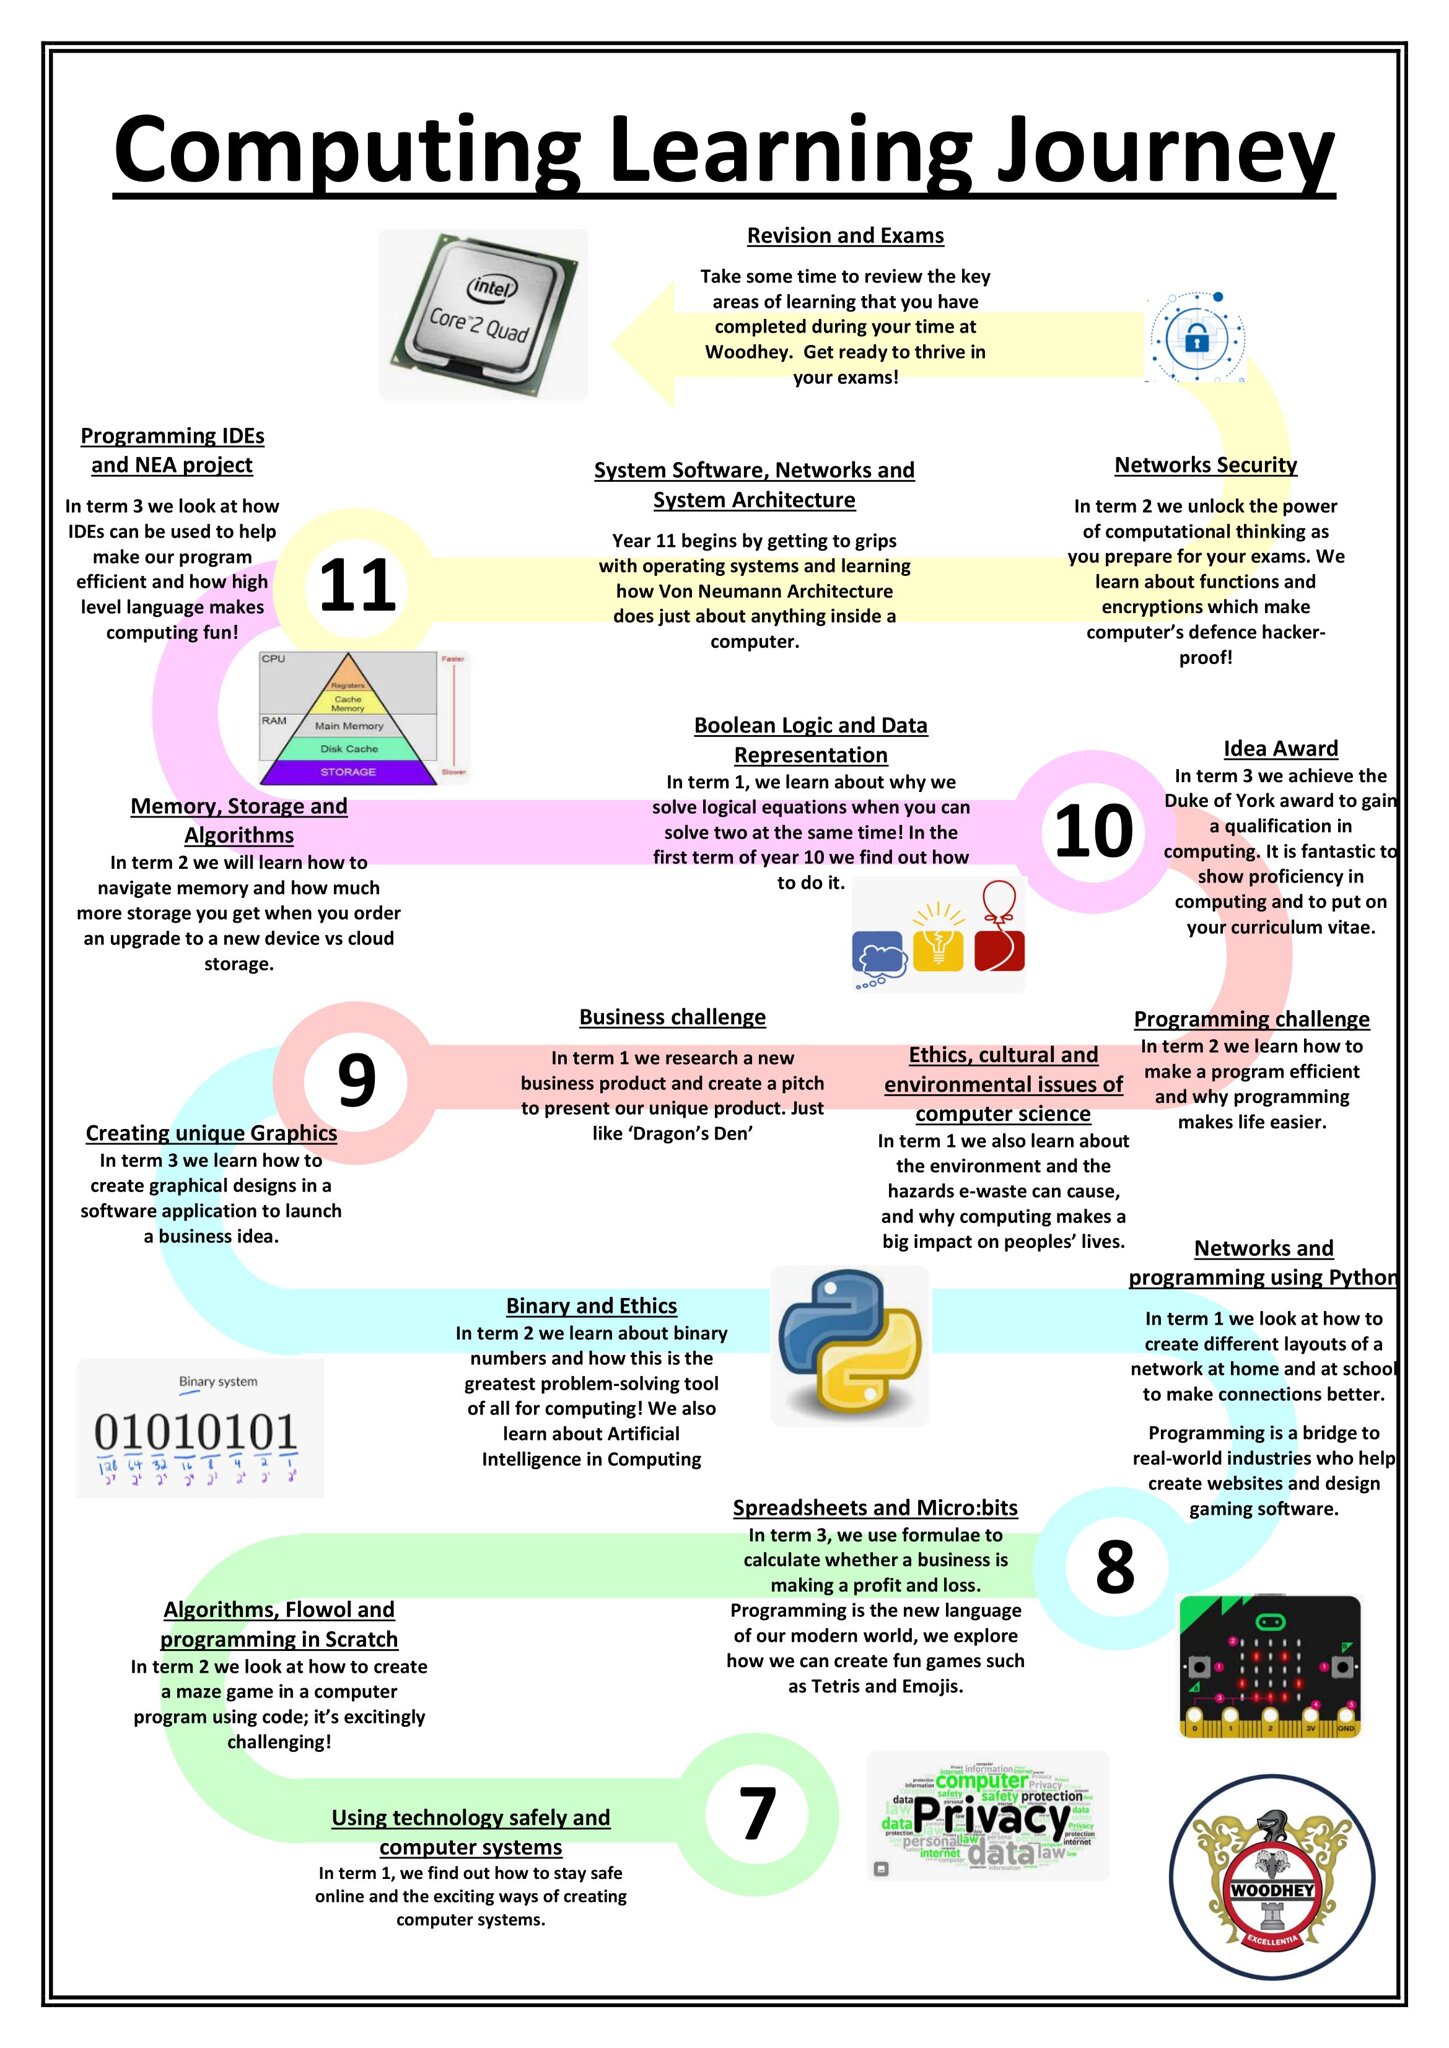 Computing Learning Journey